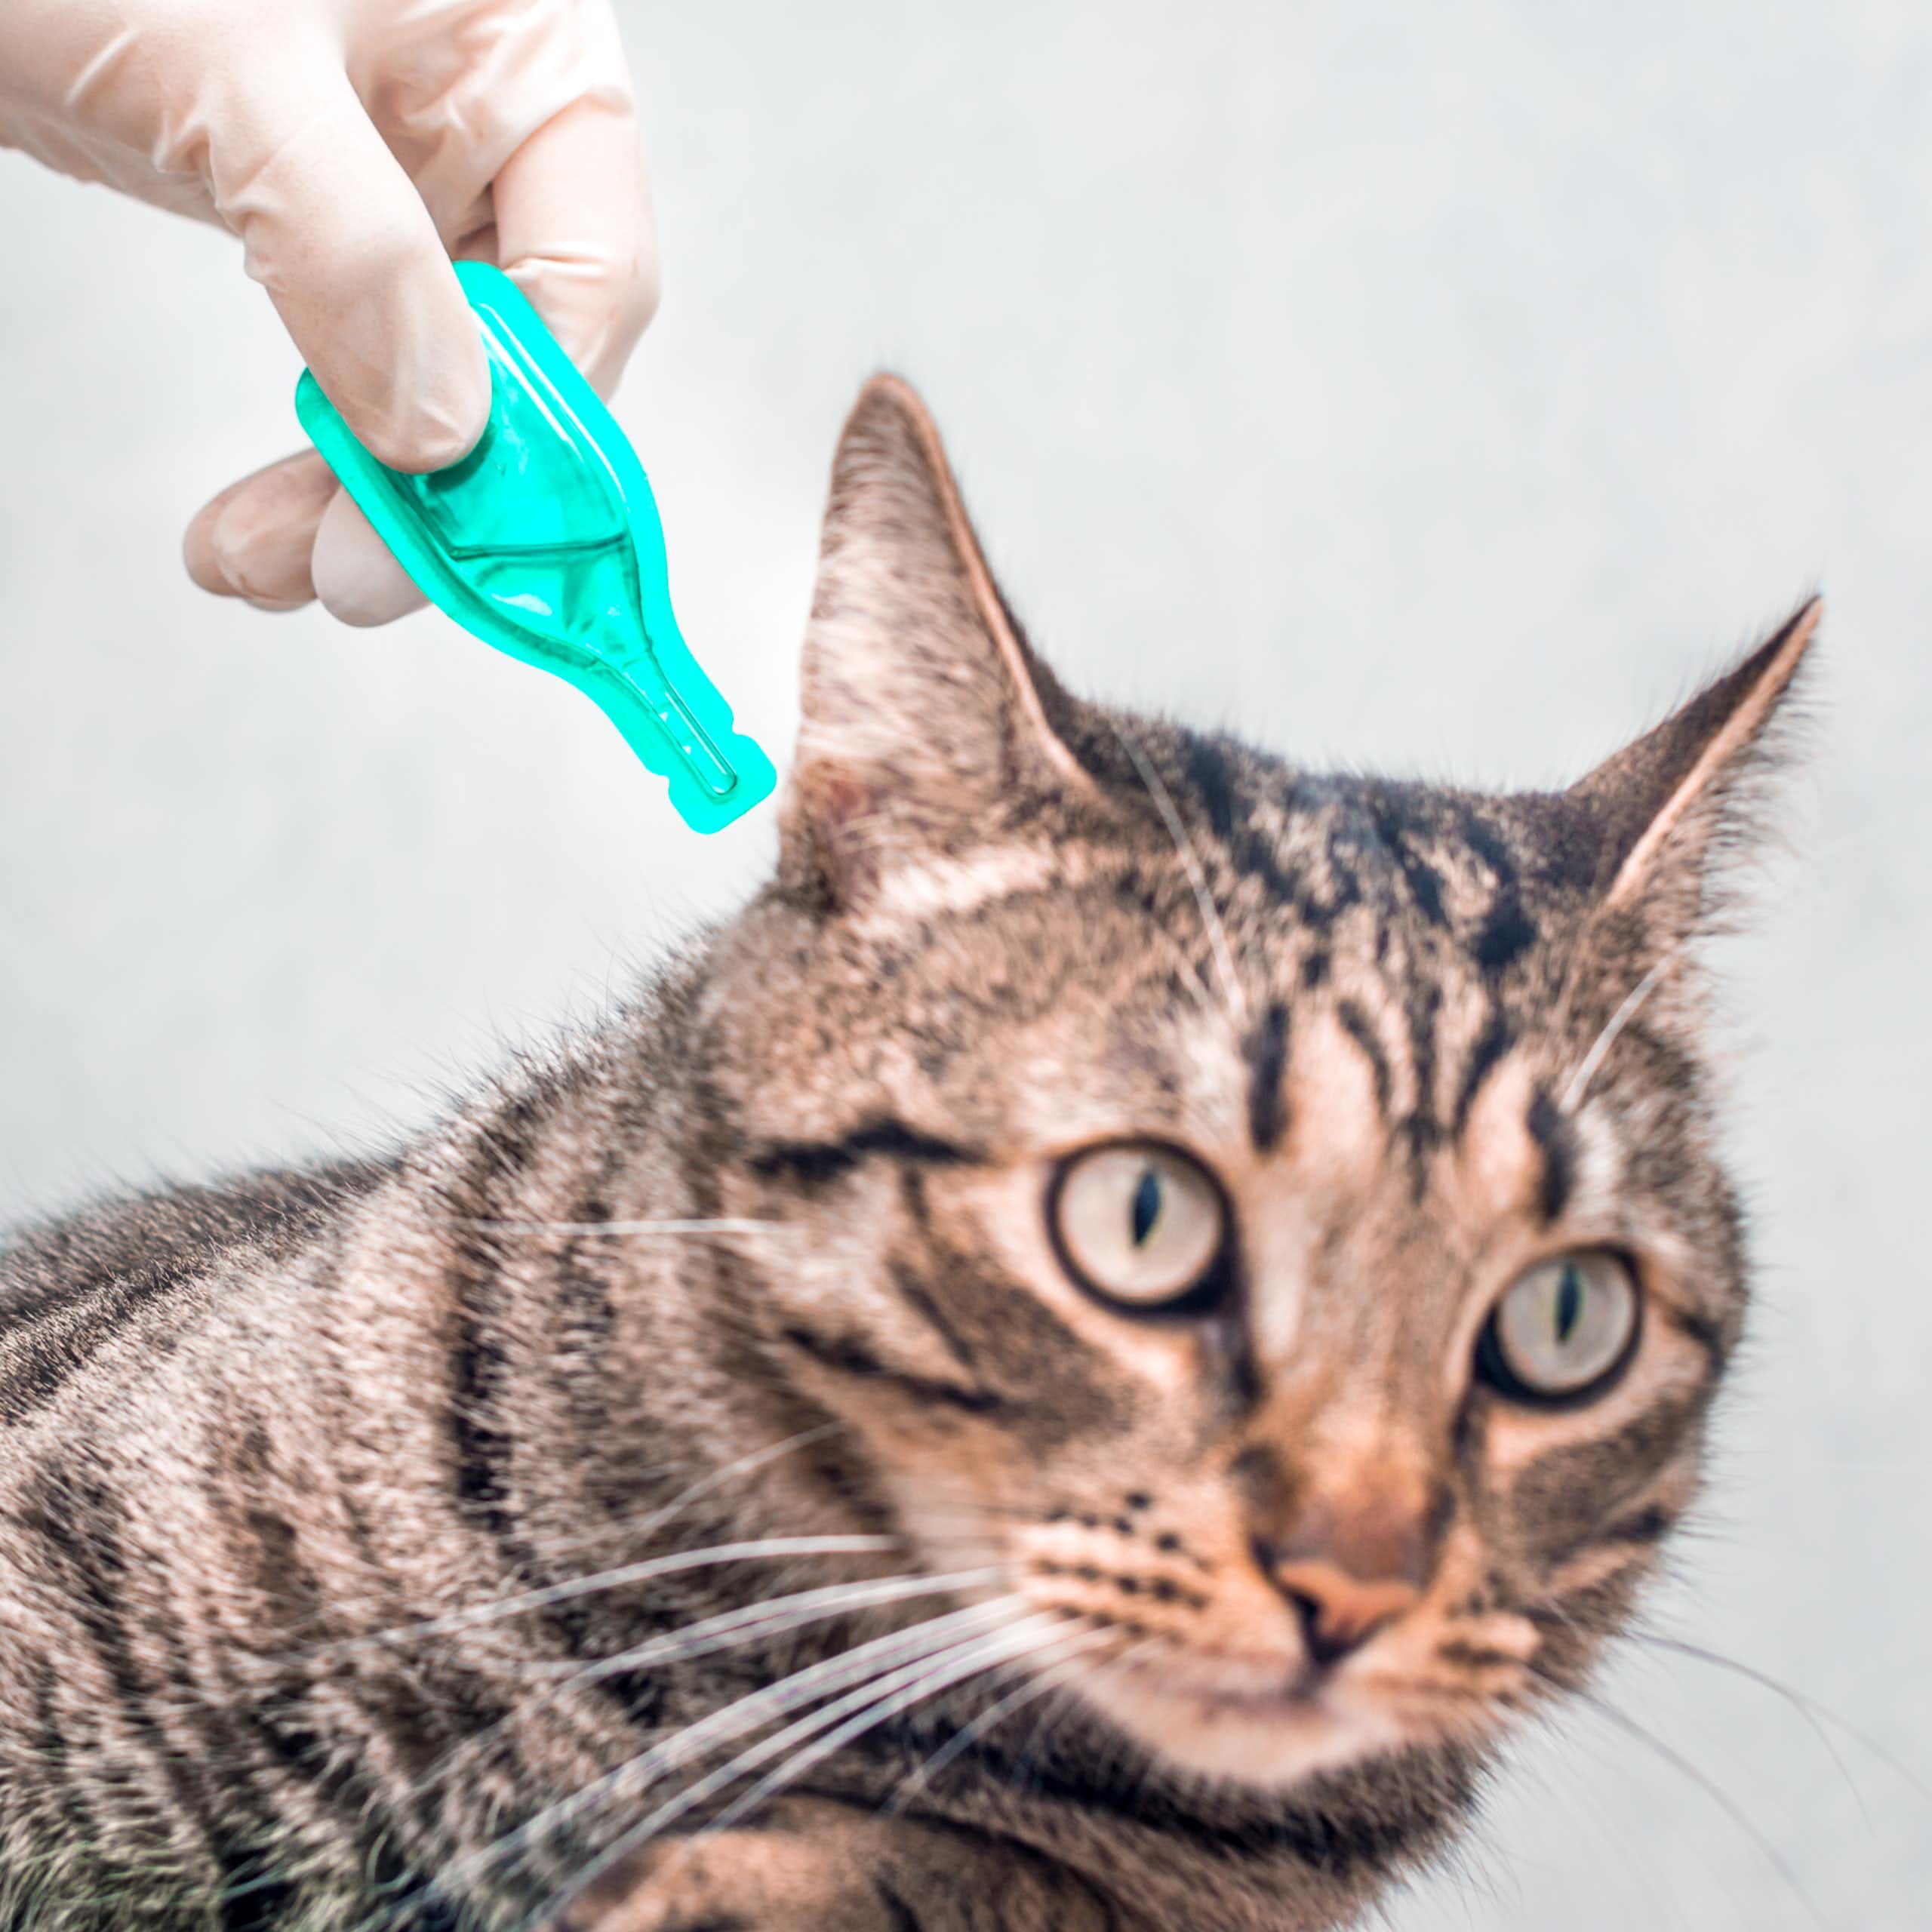 tabby cat close up of head, gloved human hand applying tick treatment using bright green drop sachet to cat's neck, white background